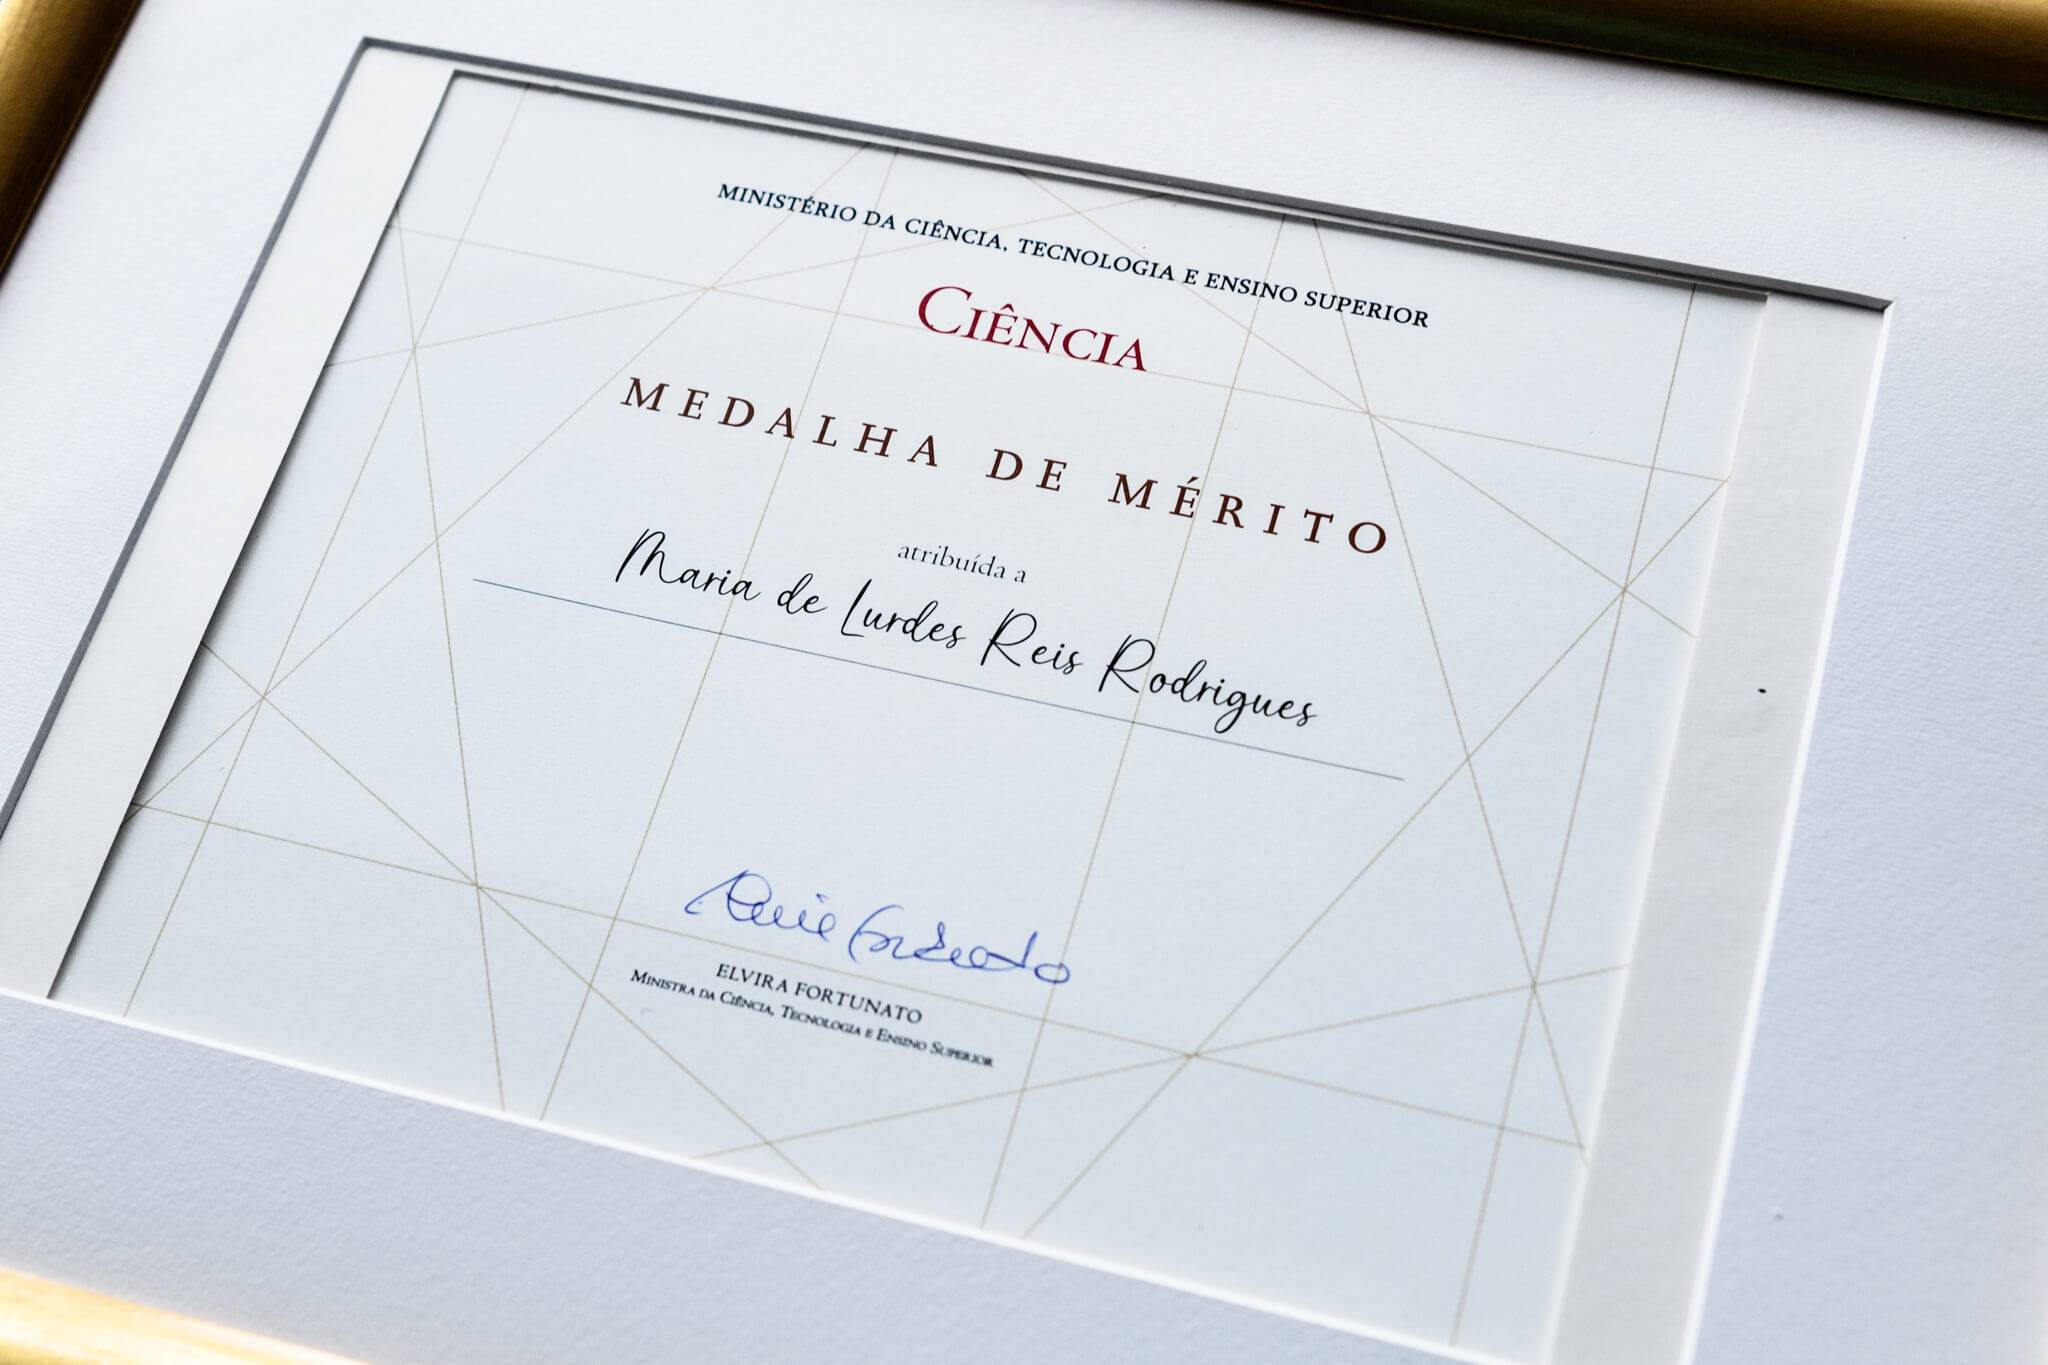 Maria de Lurdes Rodrigues was honoured with the Medal of Scientific Merit by MCTES